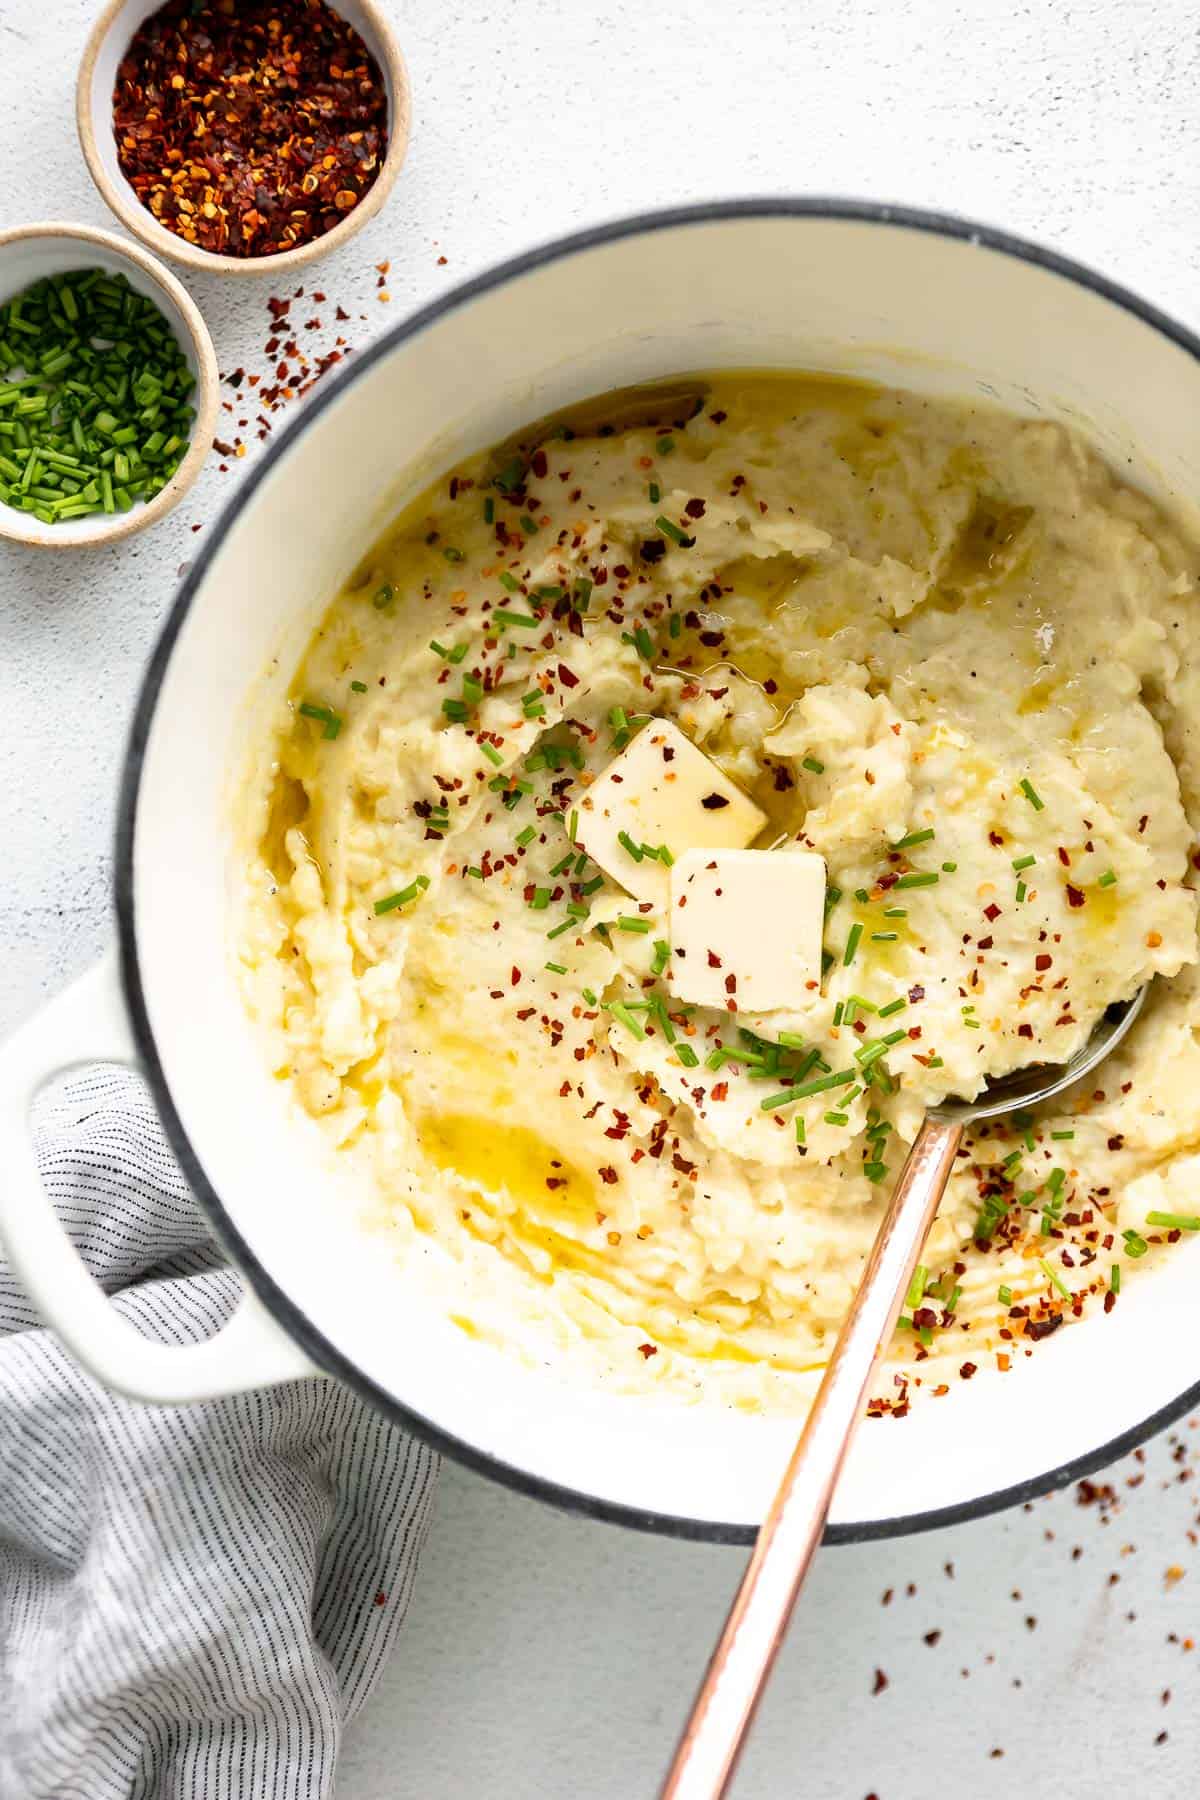 healthy vegan mashed potatoes with chives on top